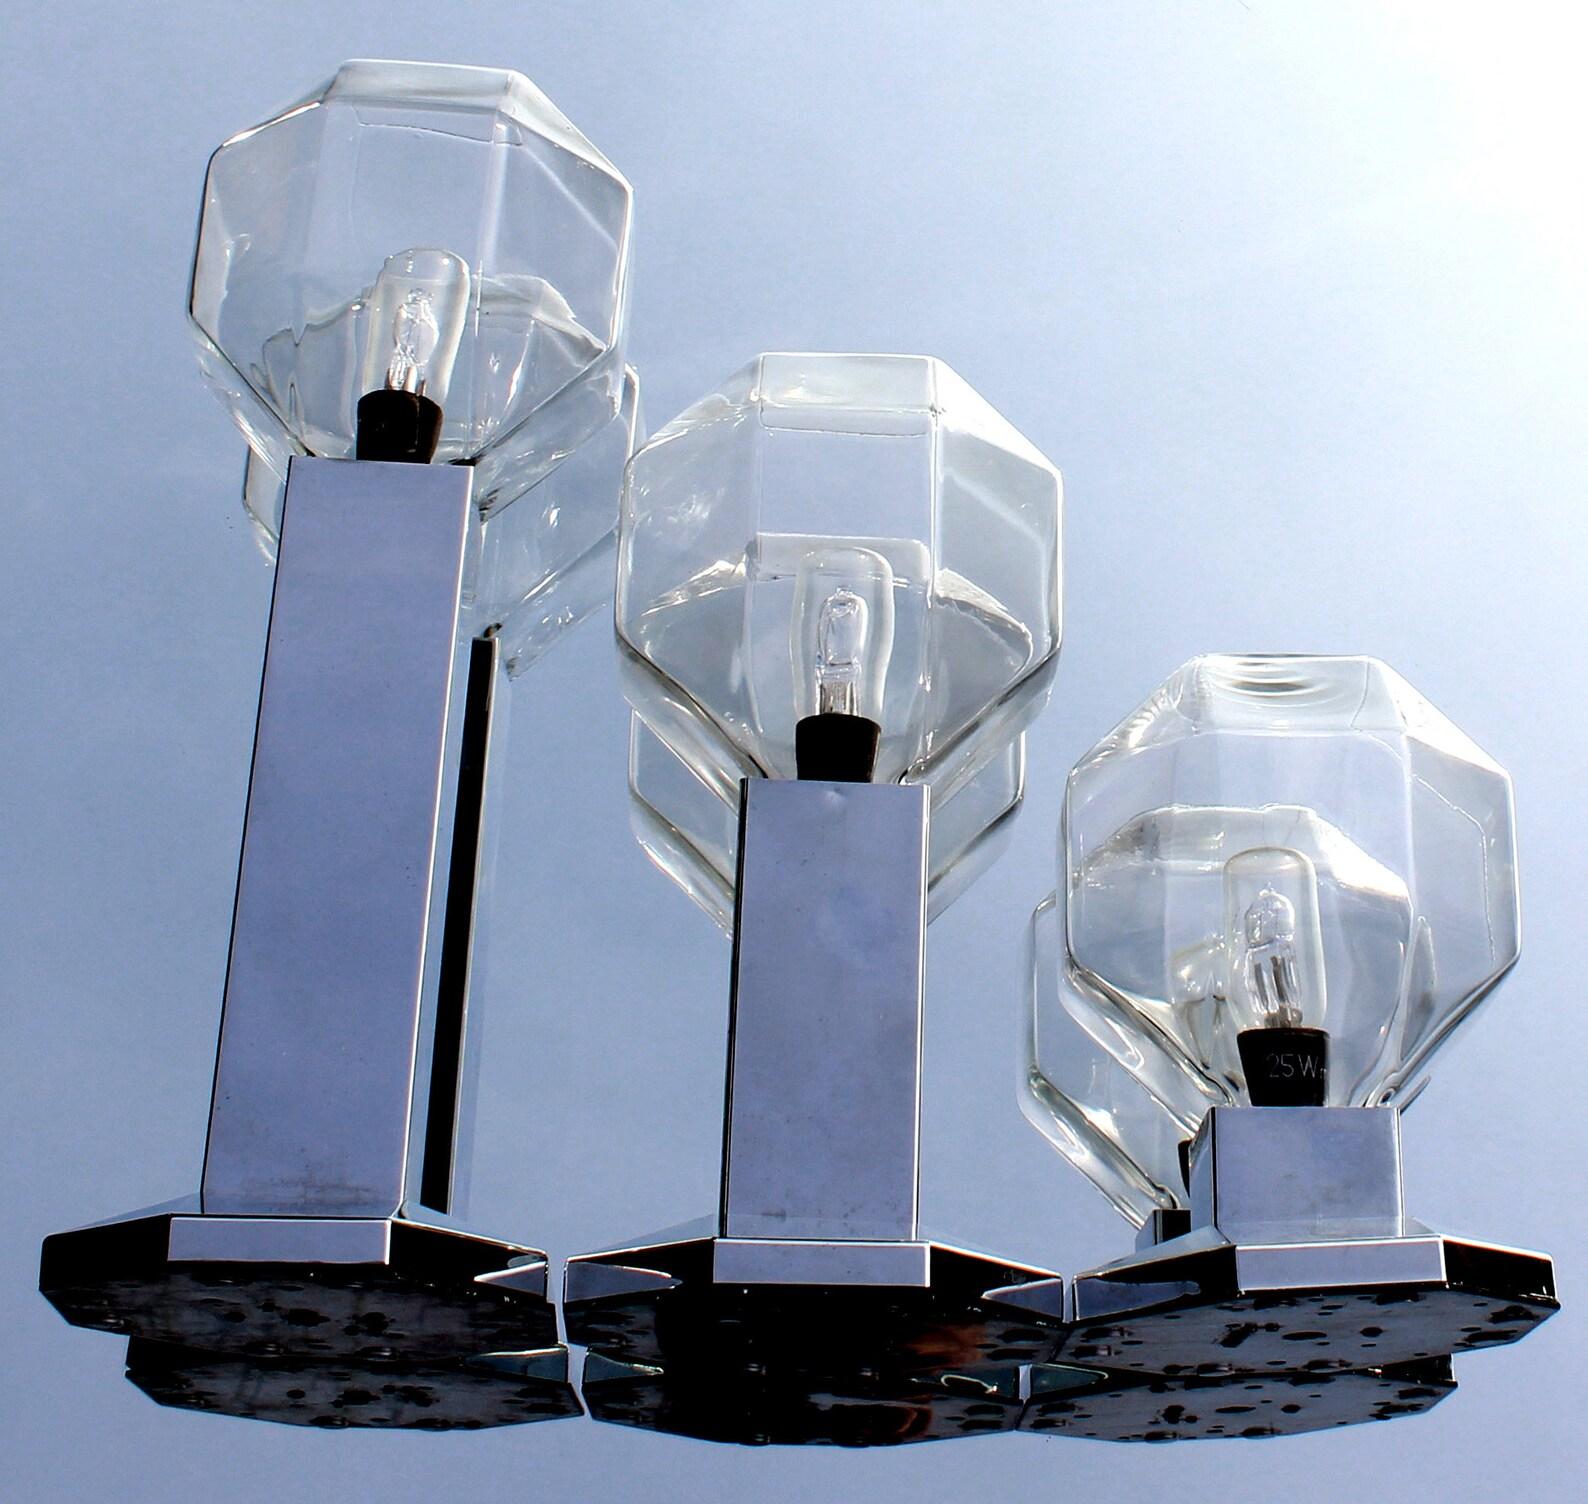 1 of 10 cluster of 5 wall or ceiling lamps (E14 bulbs) chromed & facetted glass by Motoko Ishii for staff Germany labeled 6640-45

Cluster of 5 wall lights chrome & facetted glass 1970s, rewired

The design of these well-preserved german sconces